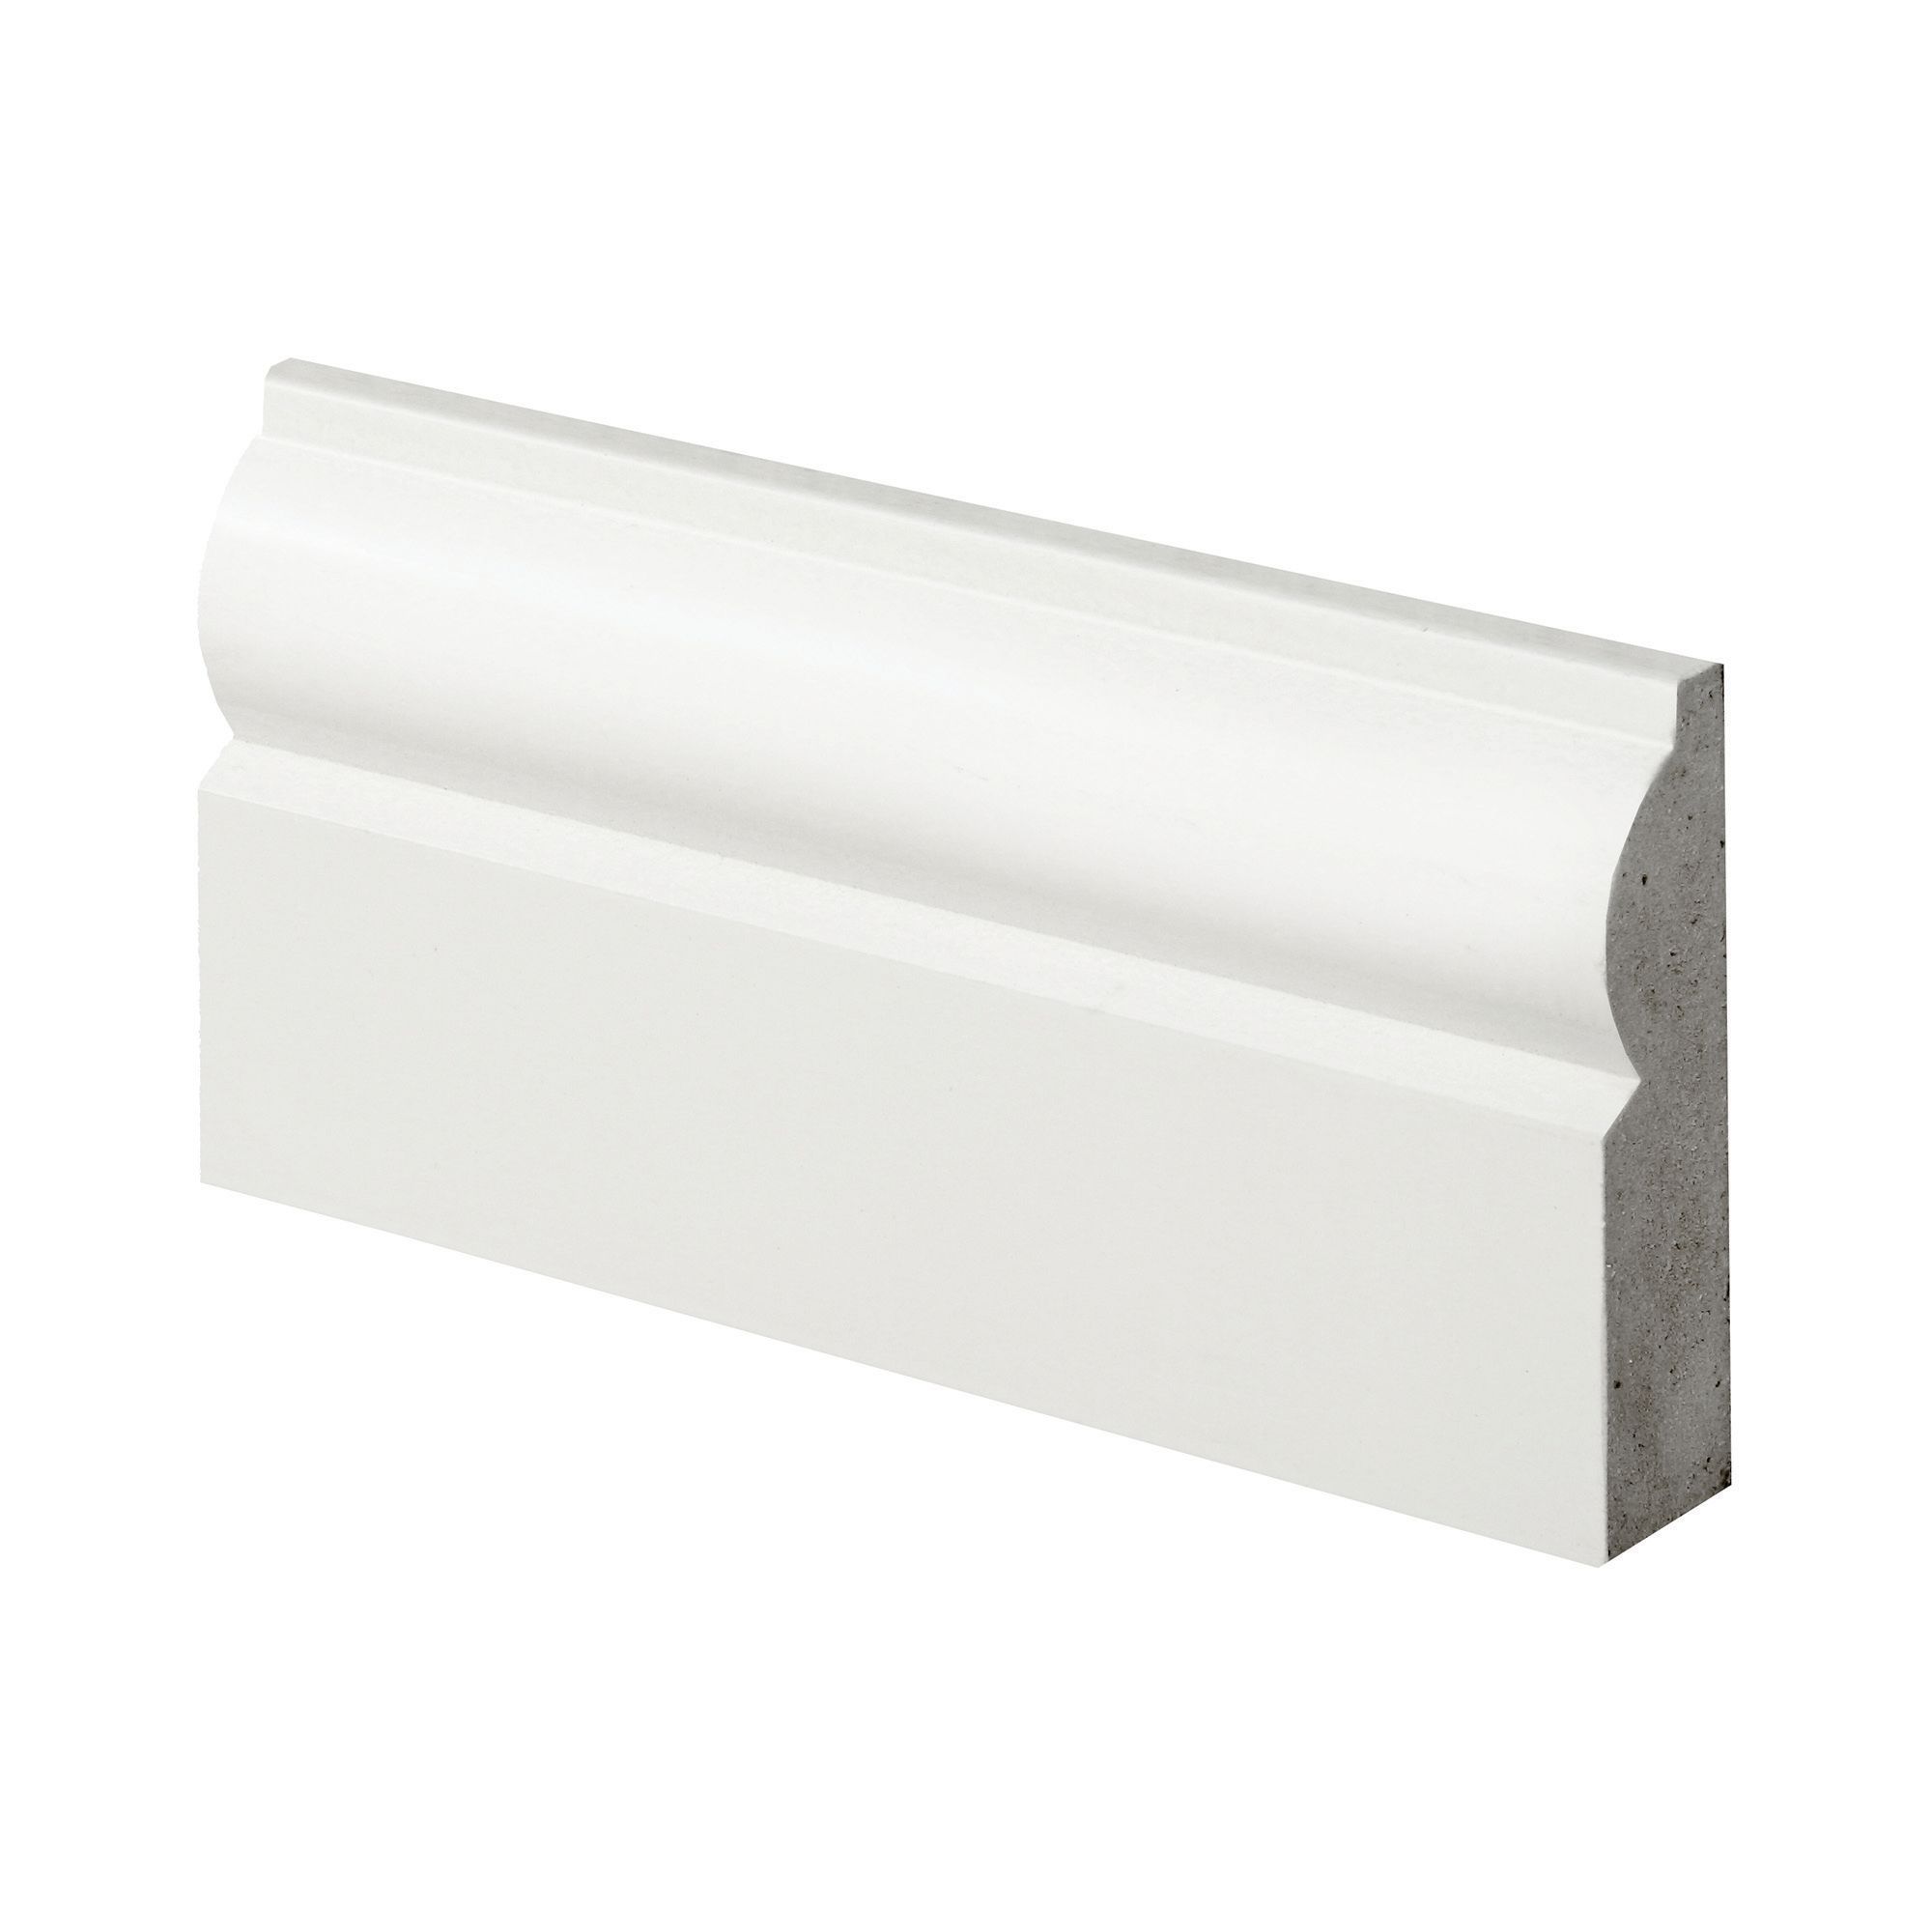 Image of Wickes Torus Fully Finished Architrave - 18mm x 69mm x 2.1m Pack of 5